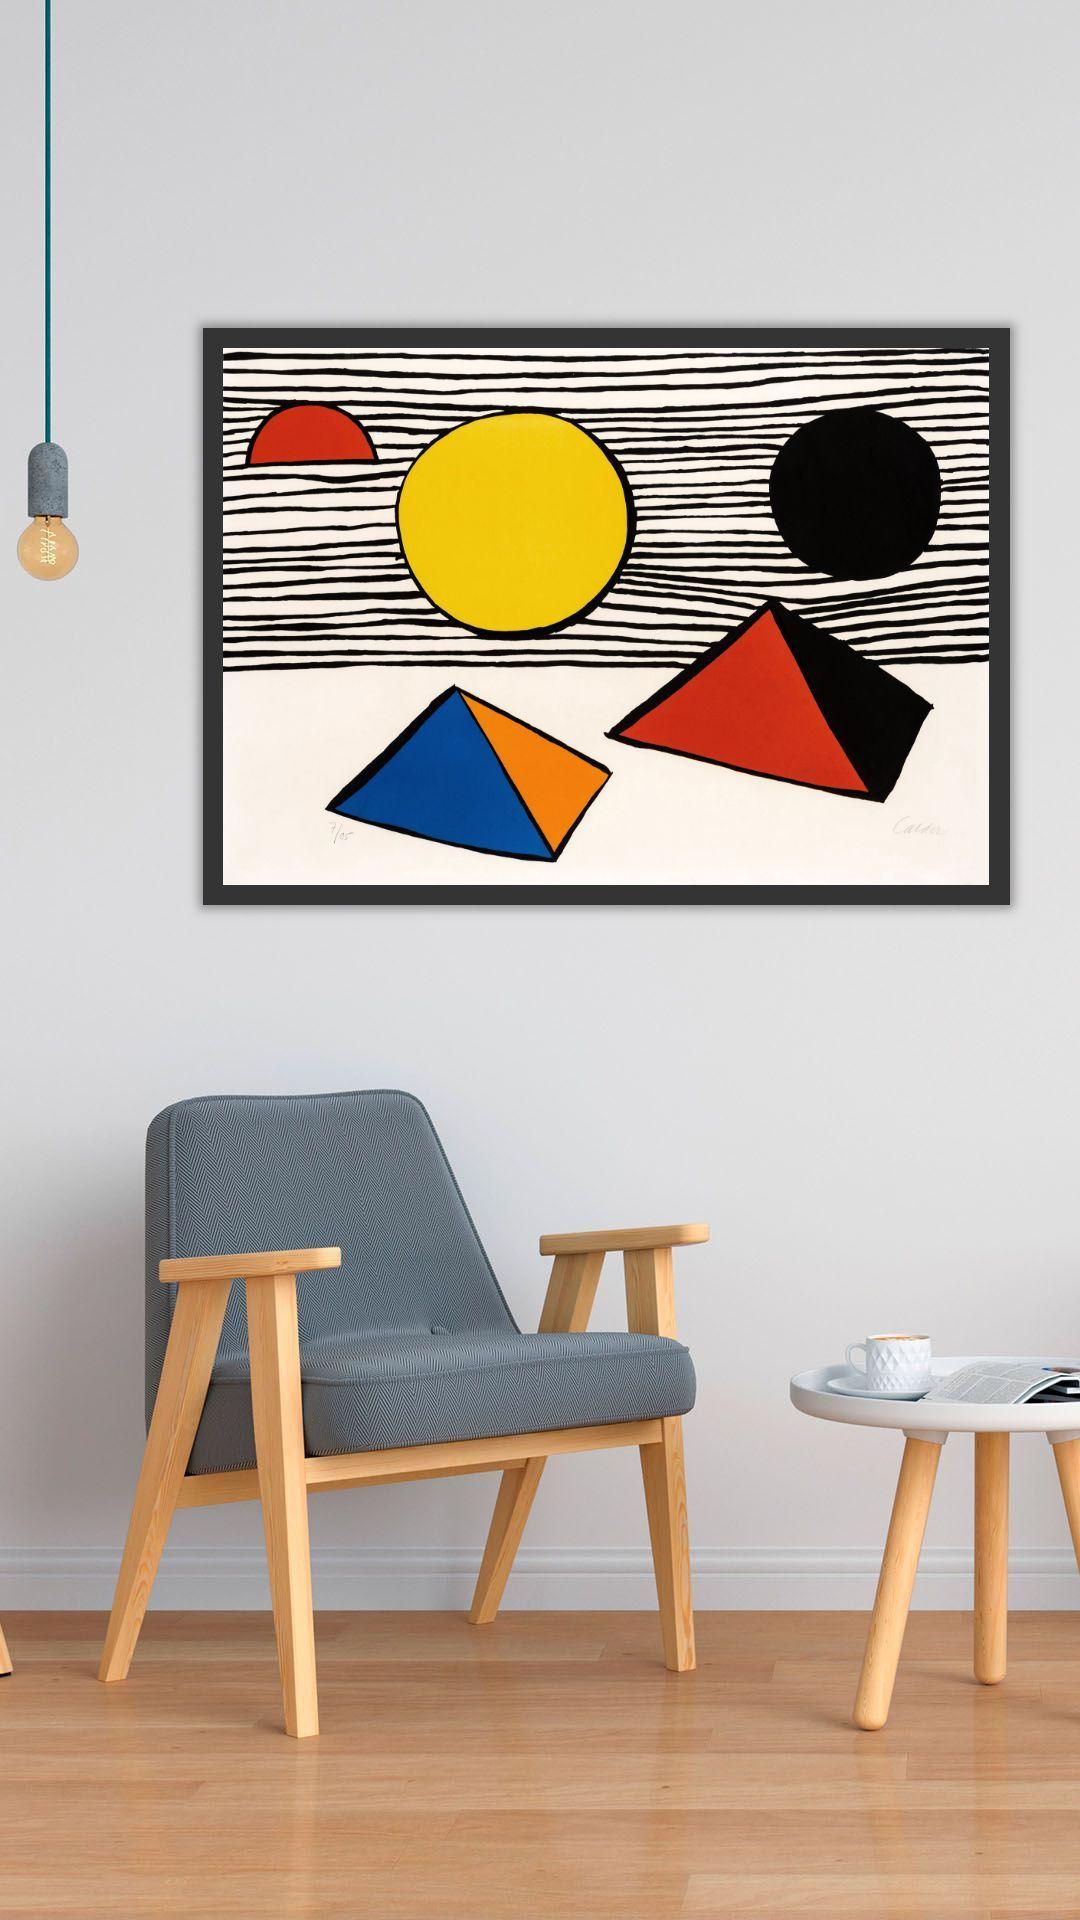 ALEXANDER CALDER  PYRAMIDS AND SUN  SIGNED AND NUMBERED - Orange Abstract Print by Alexander Calder